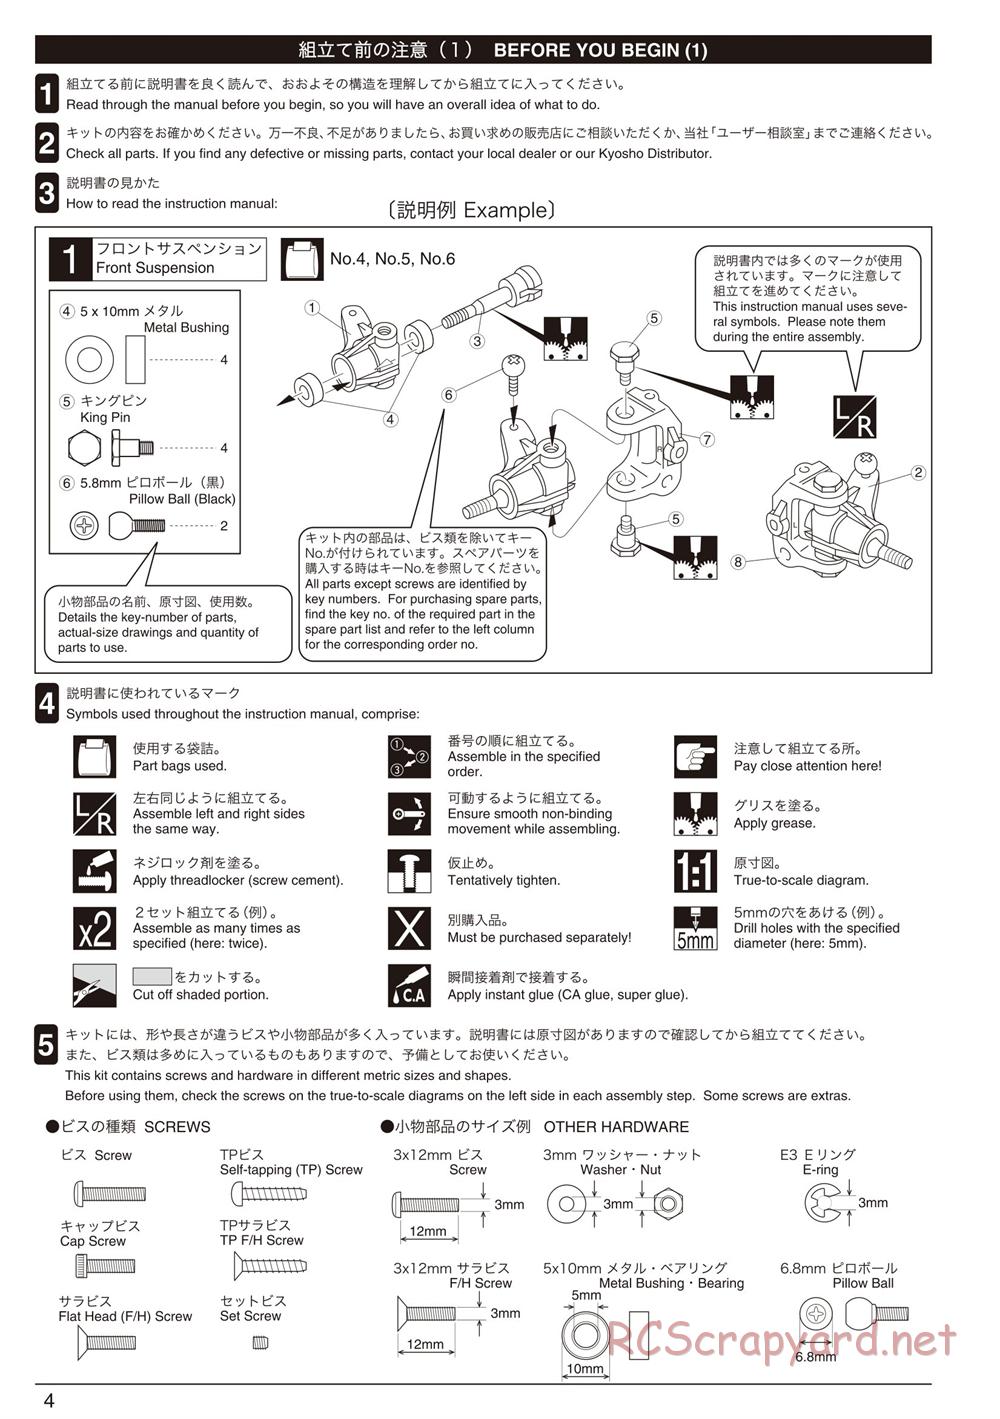 Kyosho - Ultima RB5 SP - Manual - Page 4